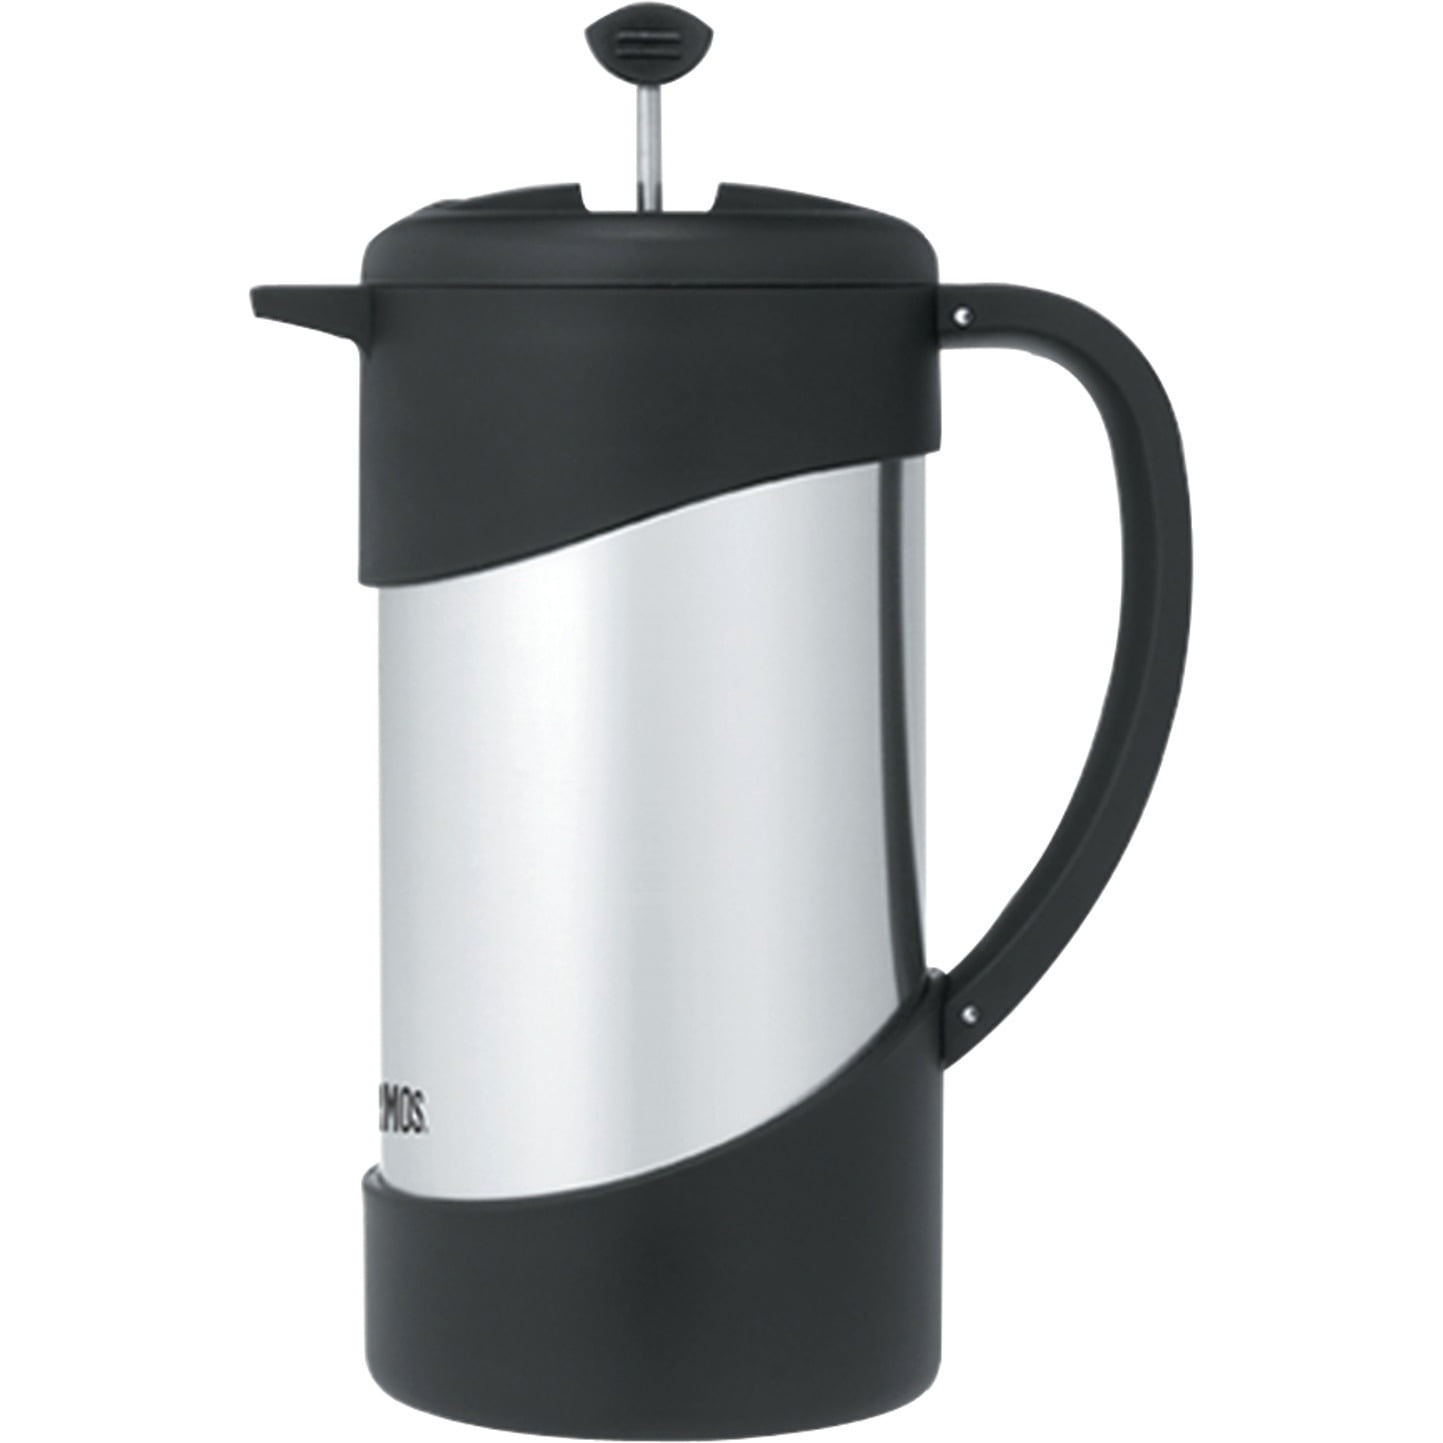 Restpresso 150 oz Silver 13/0 Stainless Steel Coffee Urn - 1000W, 30 Cup -  7 1/2 x 7 1/2 x 13 1/2 - 1 count box